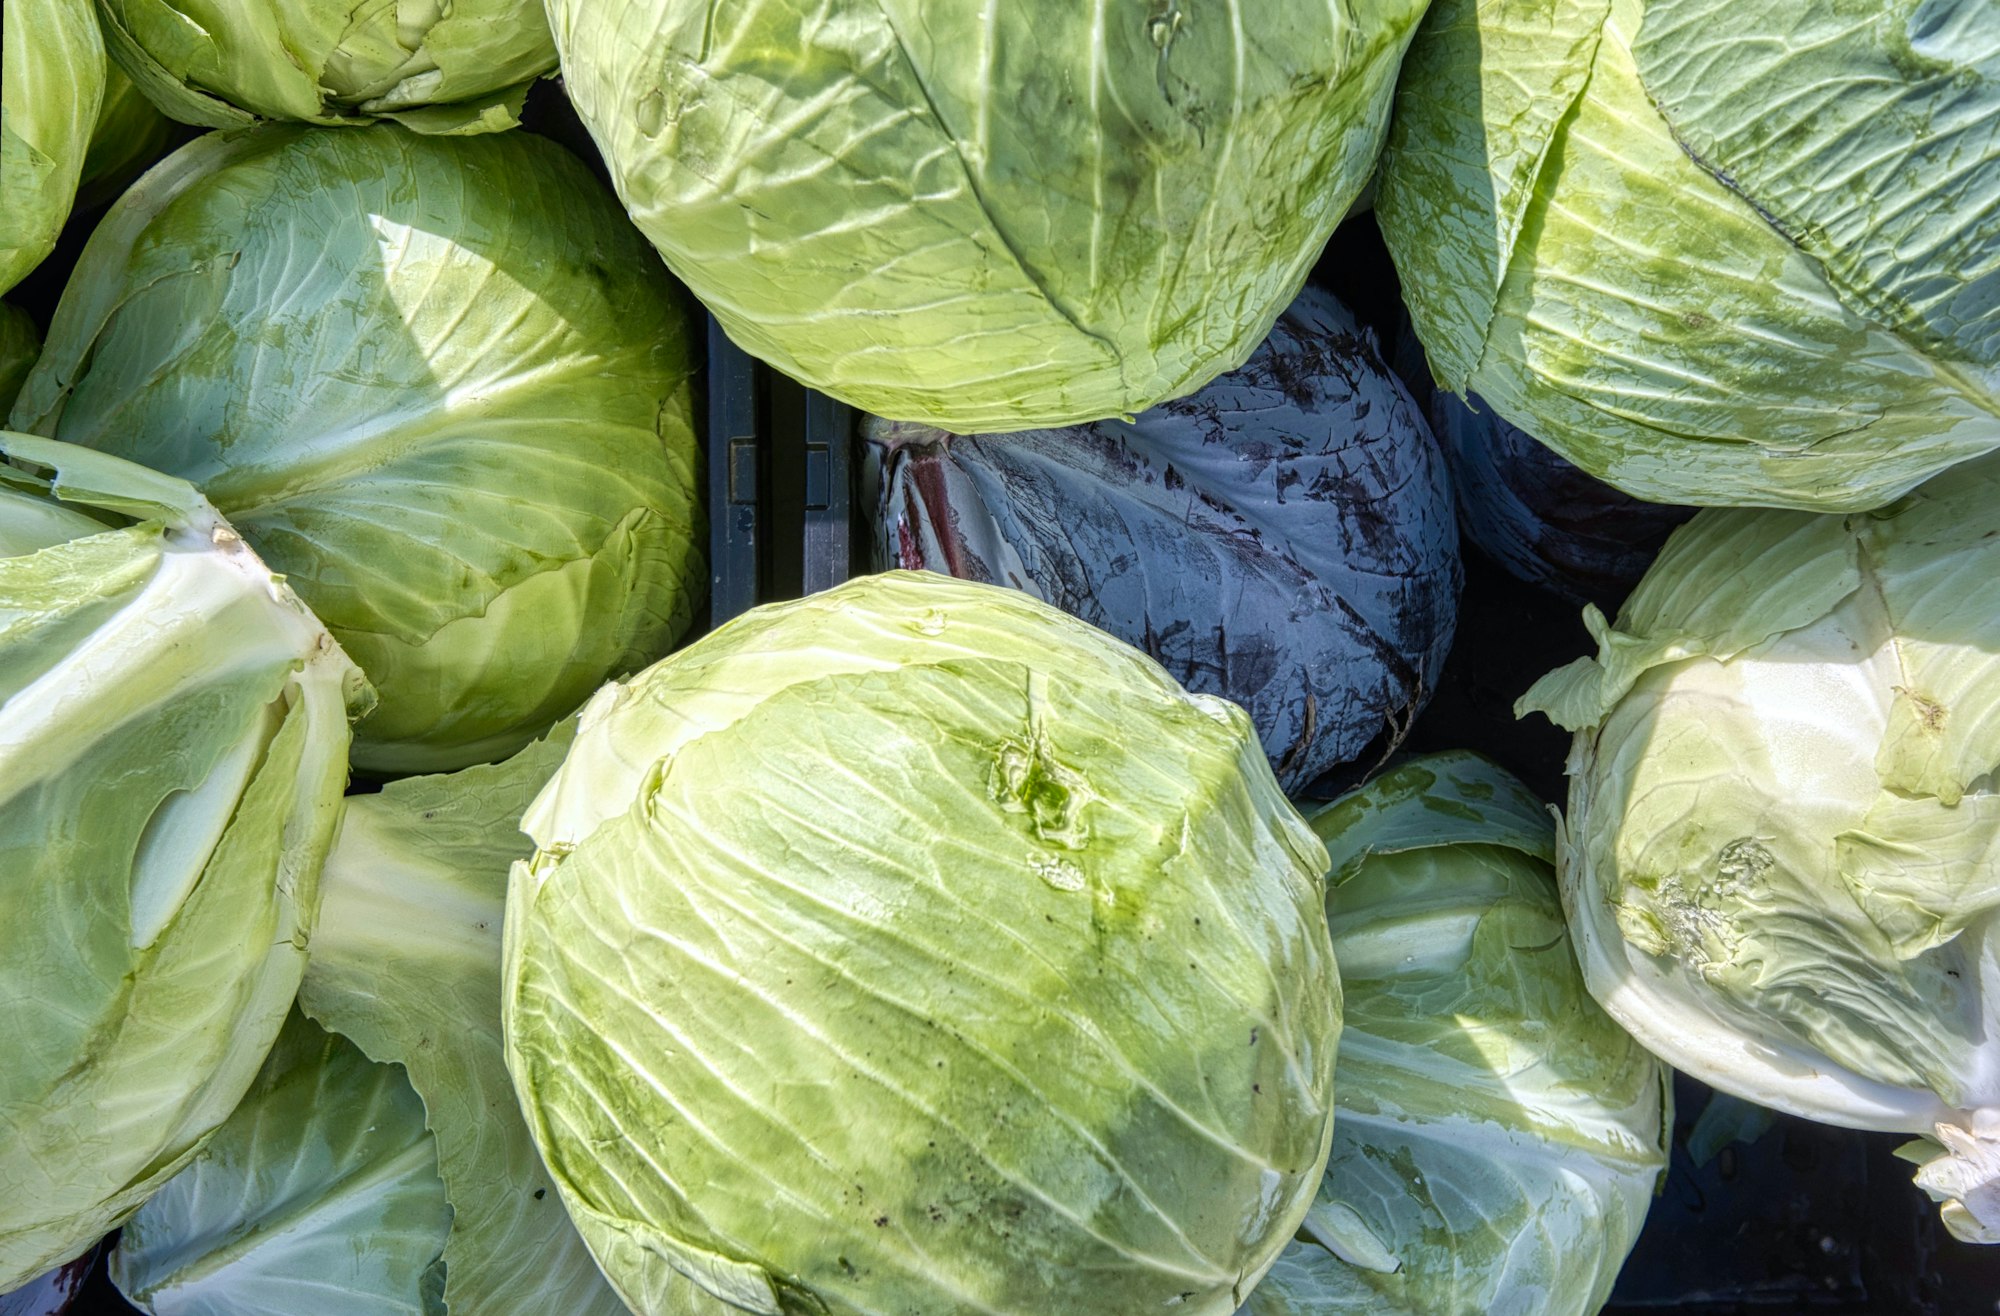 A close view of a basket of cabbages